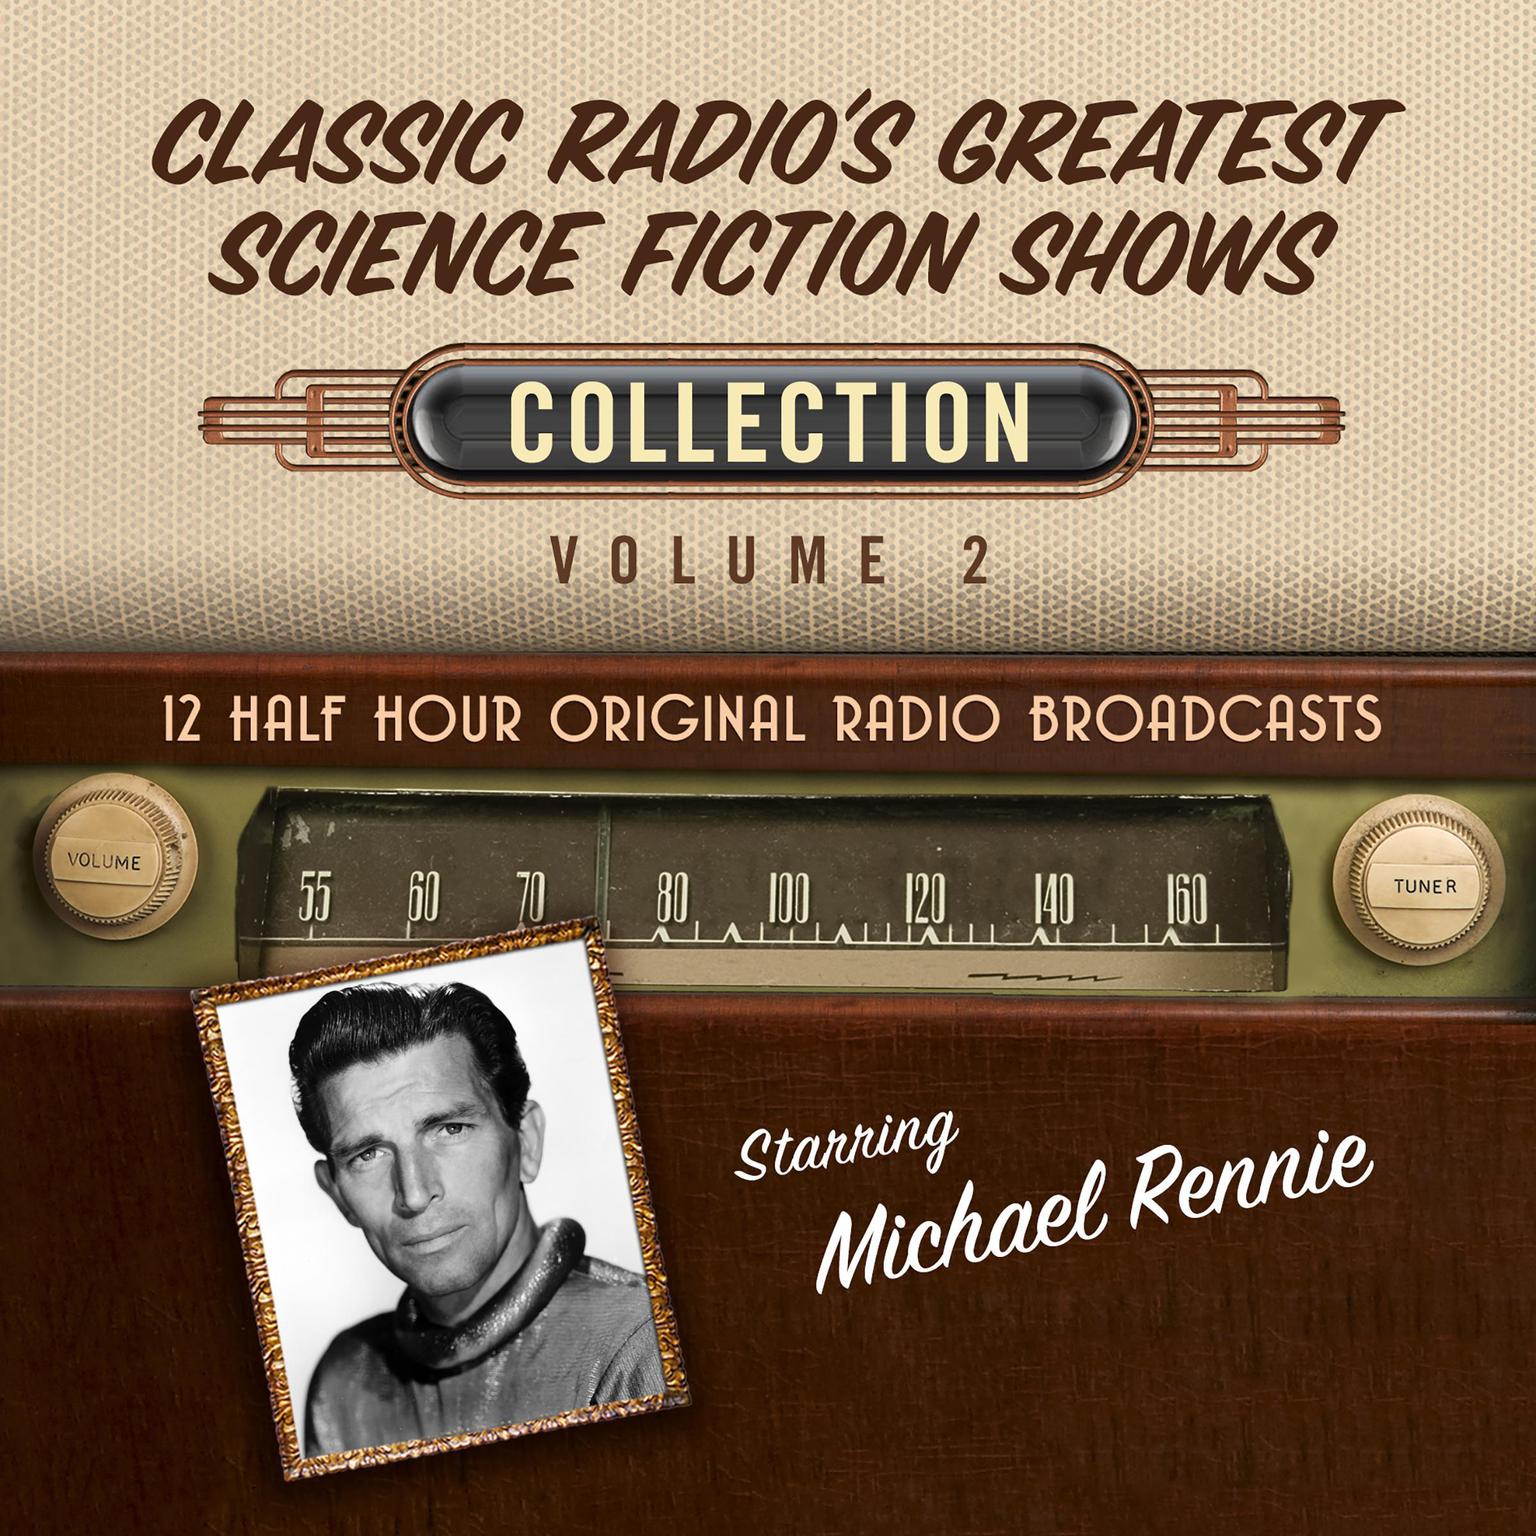 Classic Radios Greatest Science Fiction Shows Collection 2 Audiobook, by Black Eye Entertainment